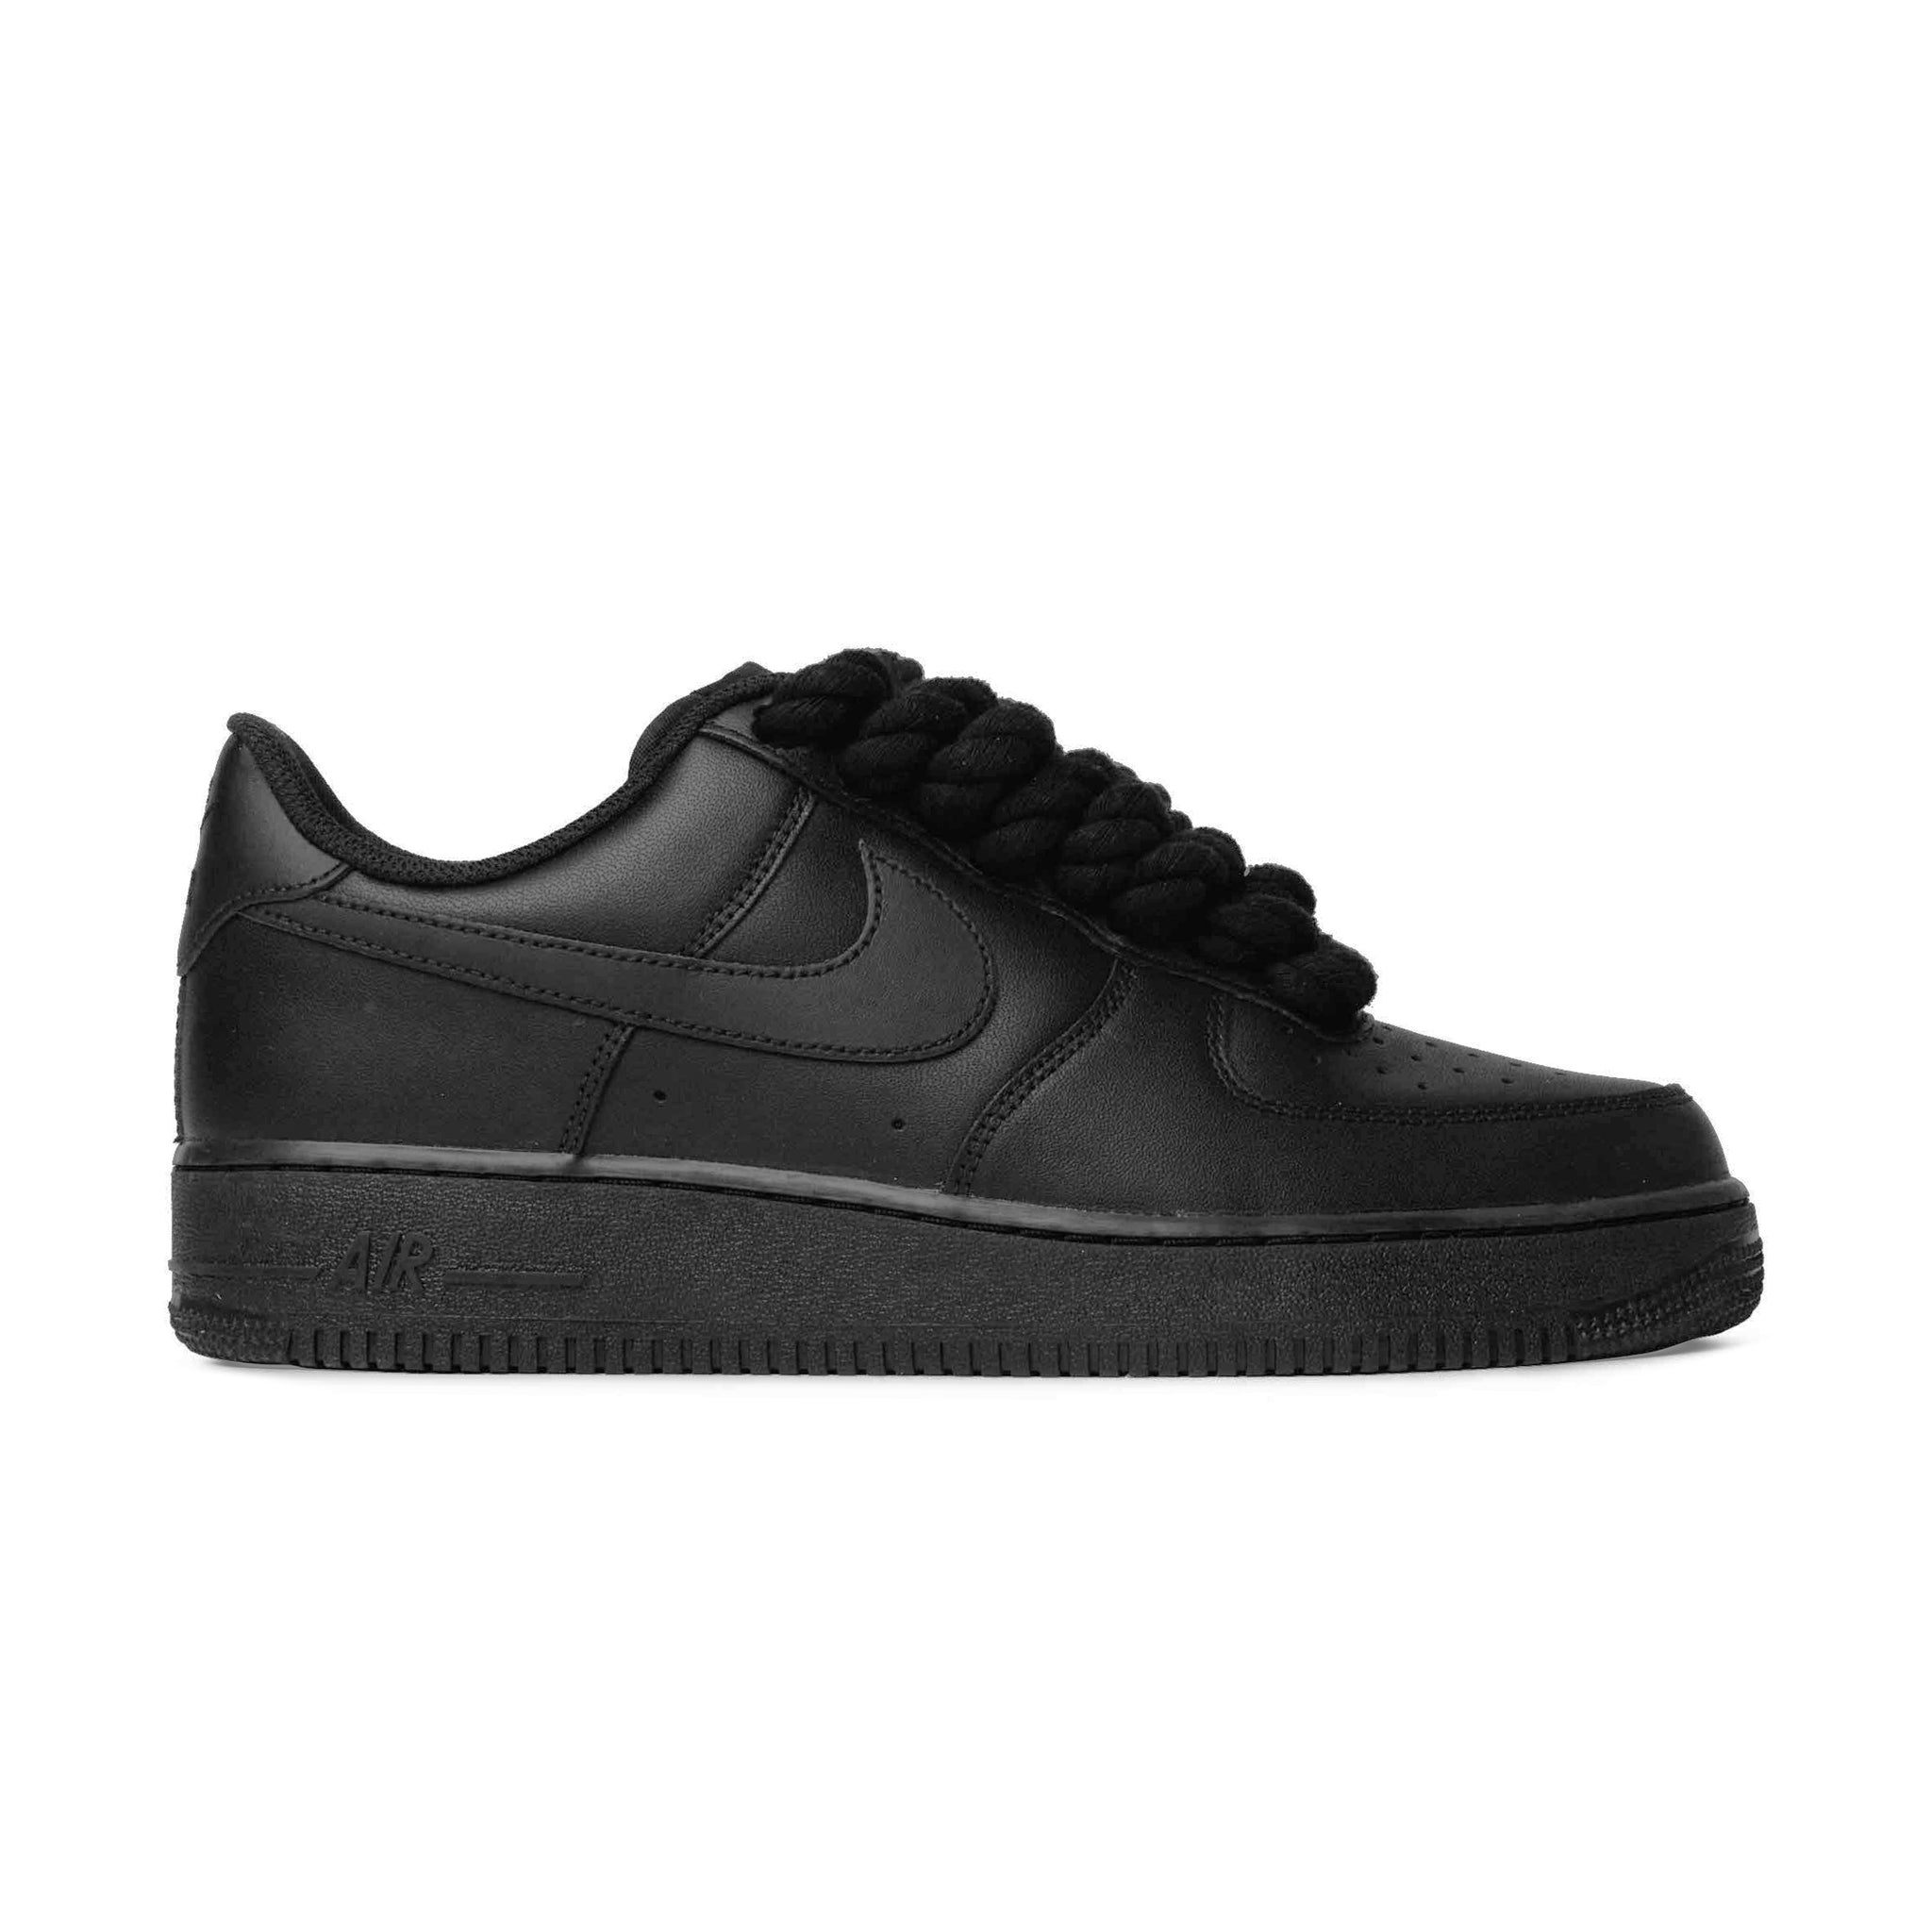 Side view of Nike Air Force 1 Low Rope Lace Black (GS) 314192-009